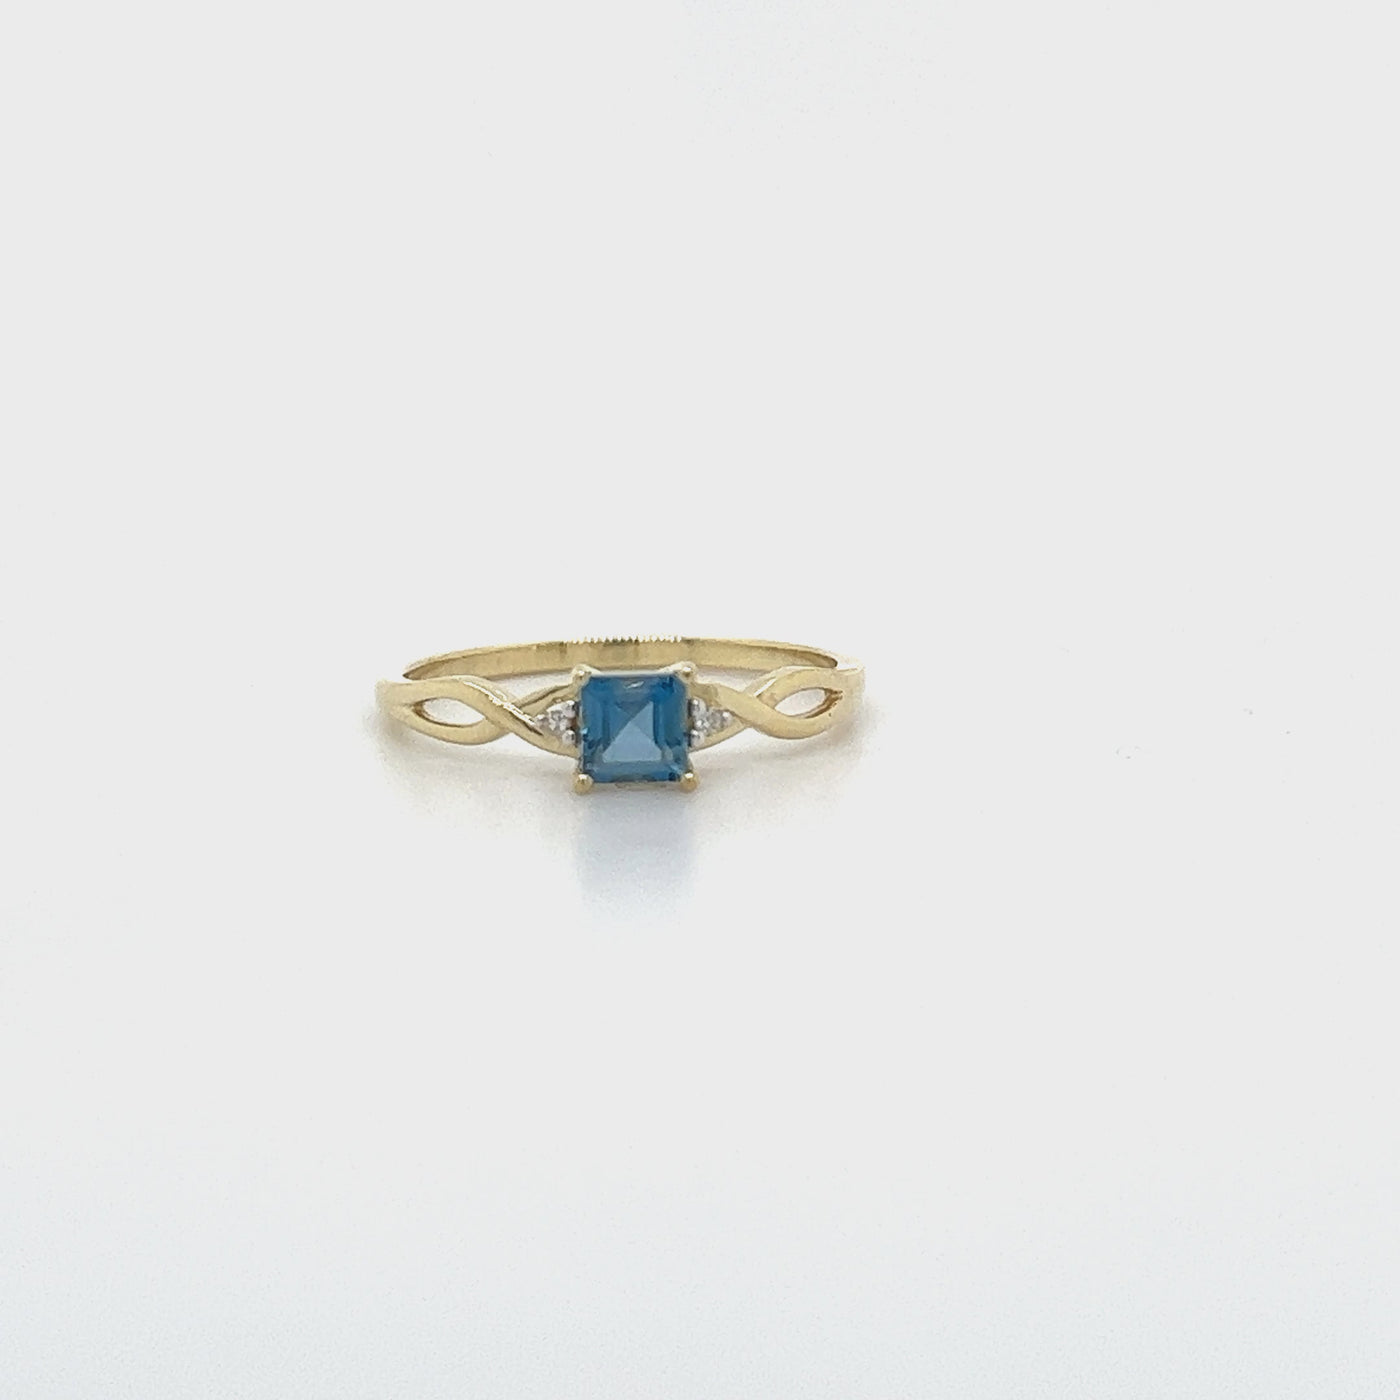 9ct Gold London Blue Topaz & Diamond Dress Ring with Infinity Shoulders.